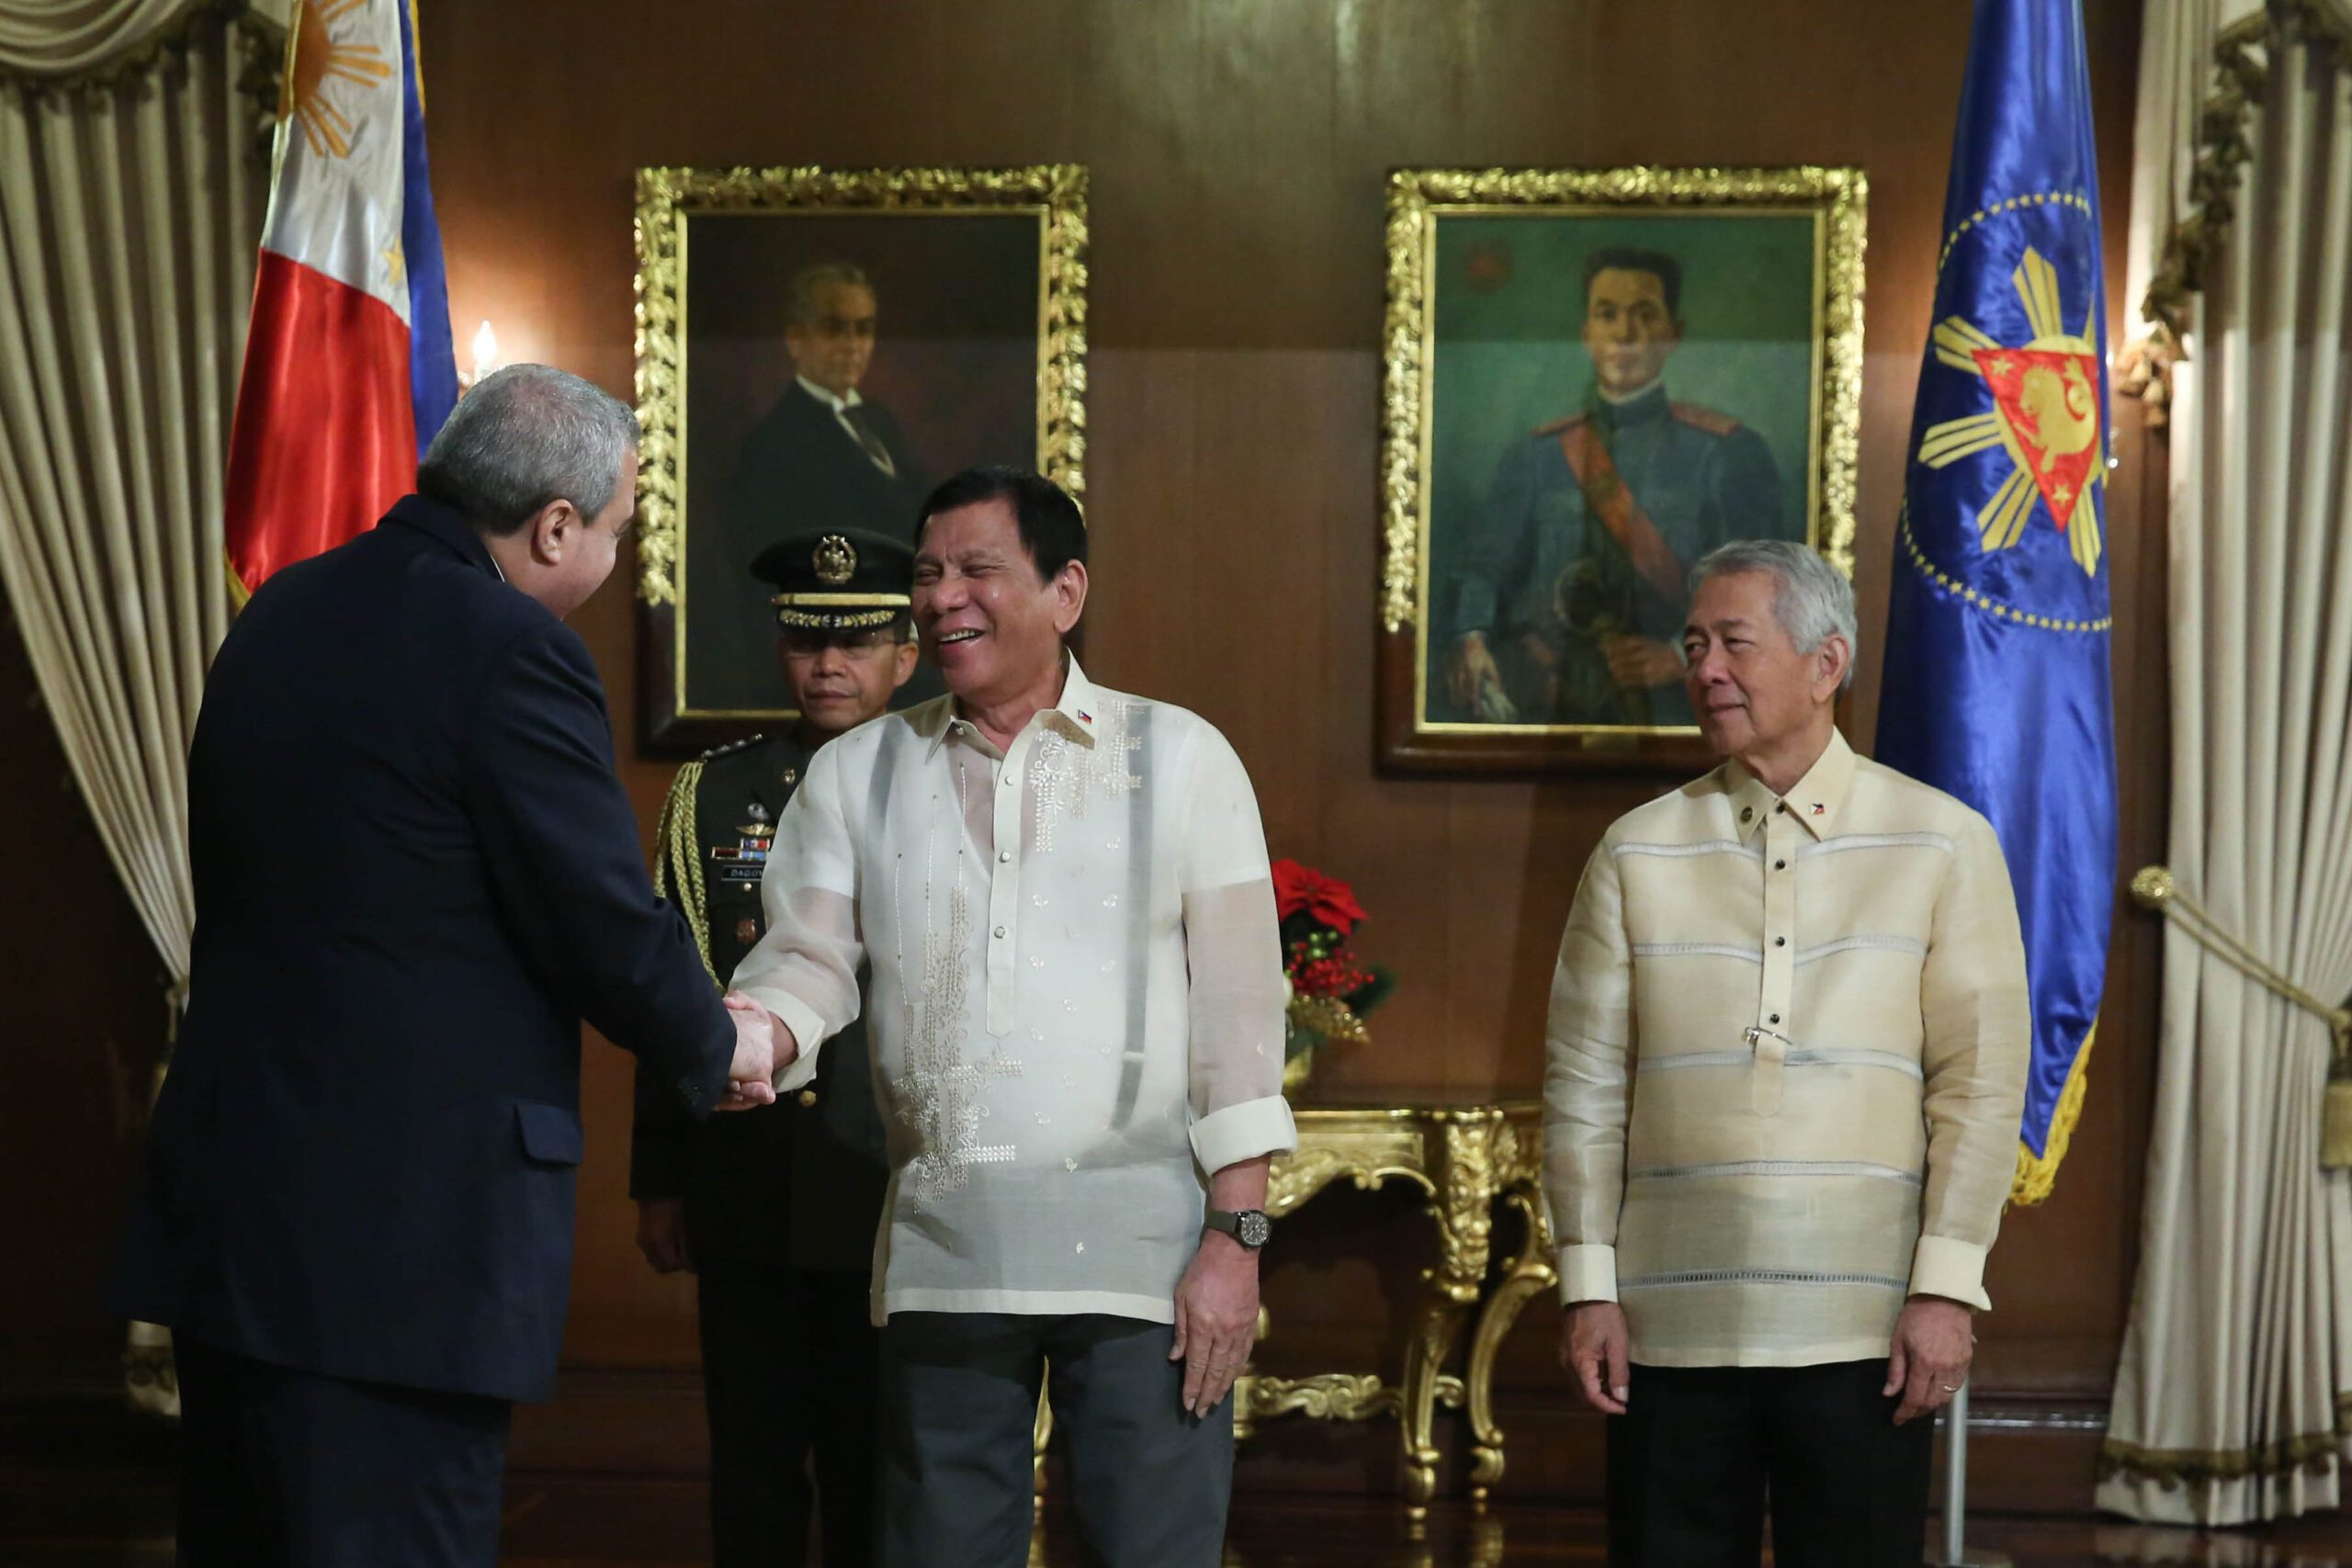 Palace defends Yasay: He has been ‘open, transparent’